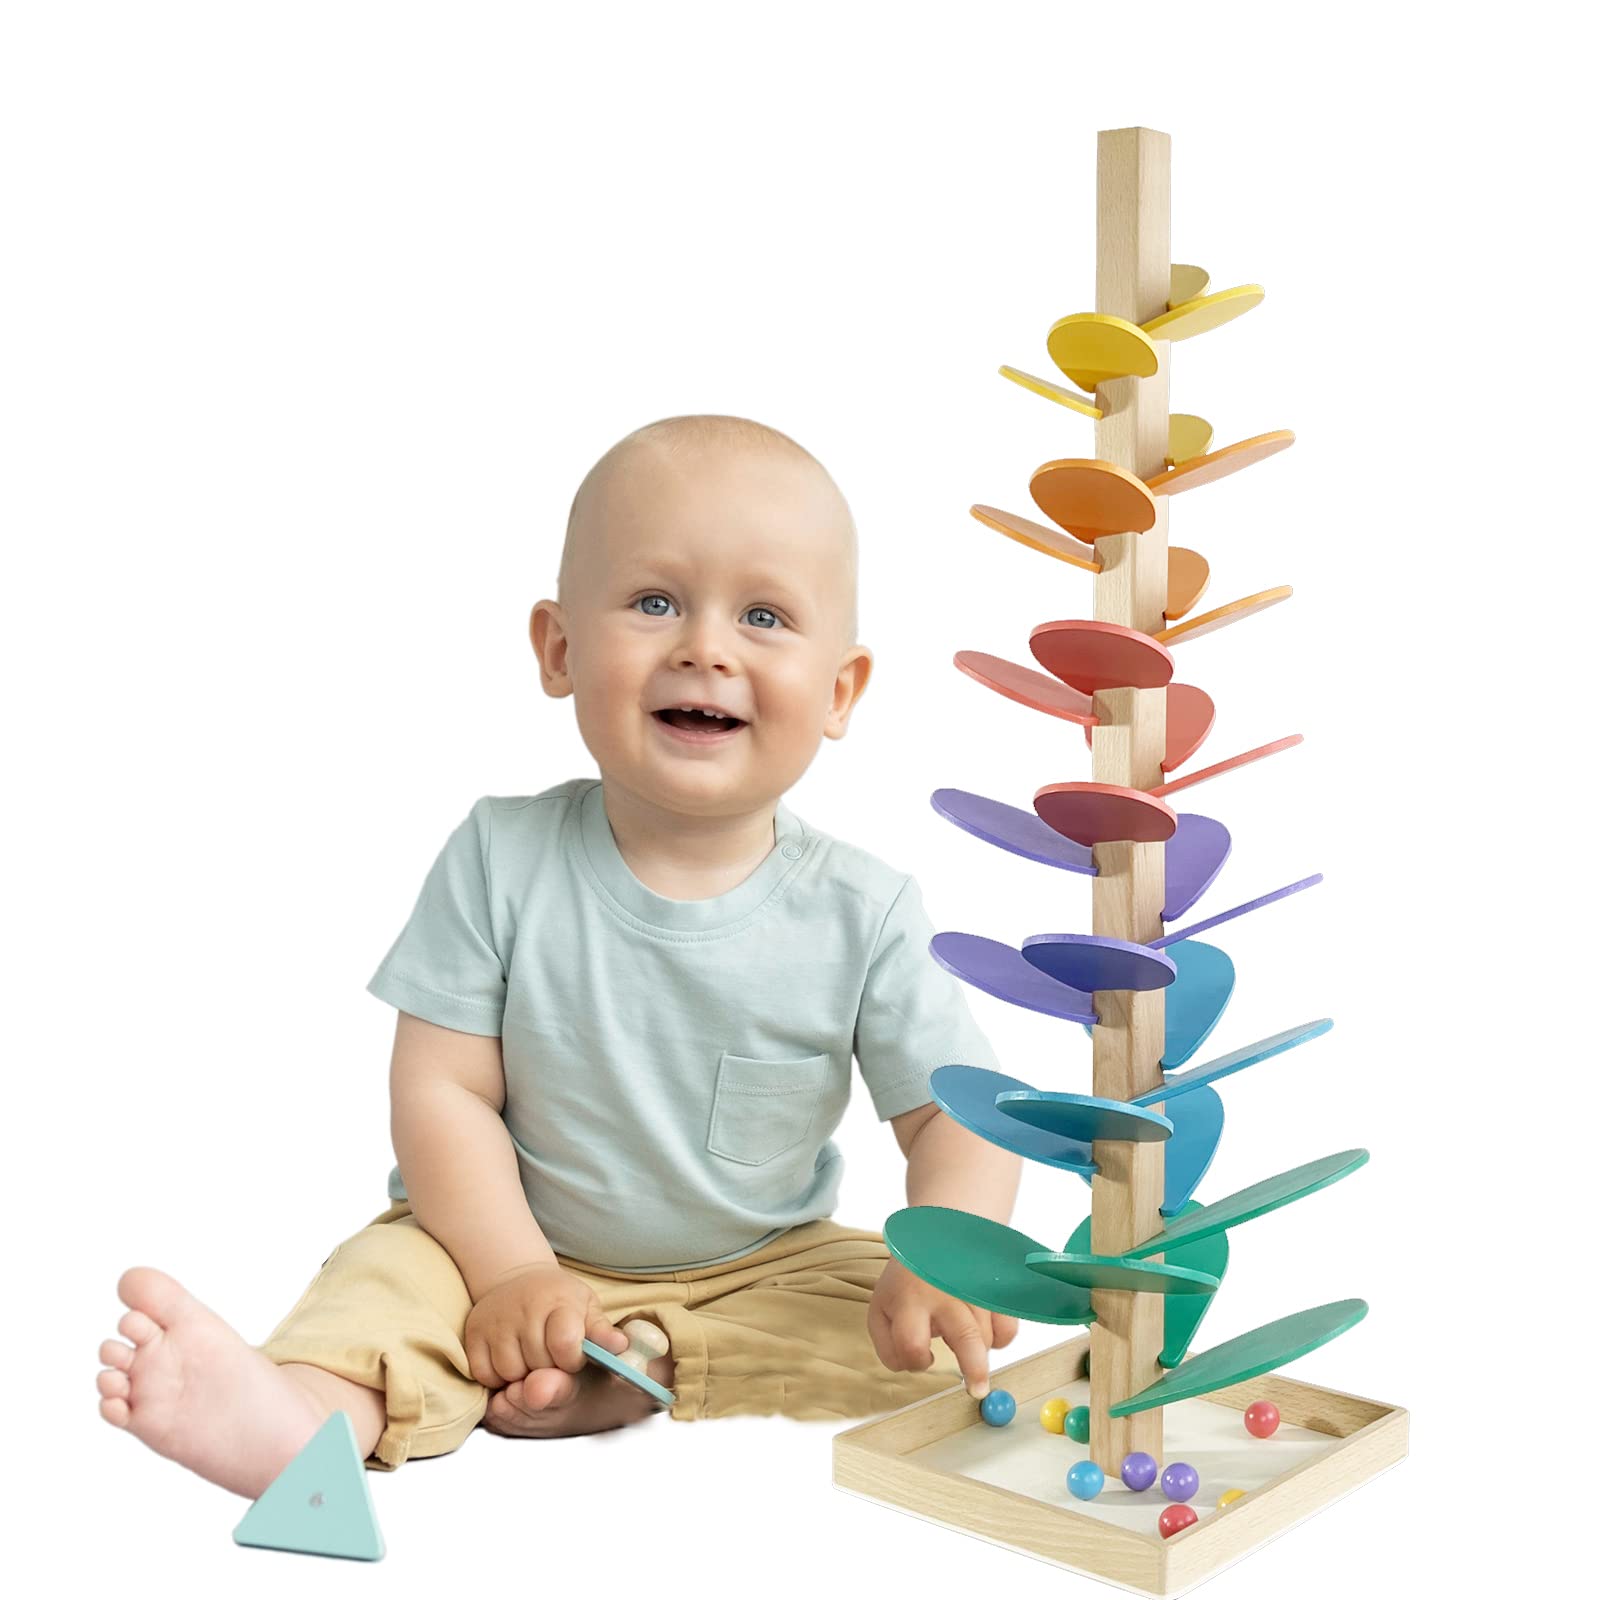 beekbork Wooden Music Tree Toy for Kids, Rainbow Musical Tree Kit Gifts, Wooden Marble Ball Run Track Montessori Educational Learning Toys for Kids 3+